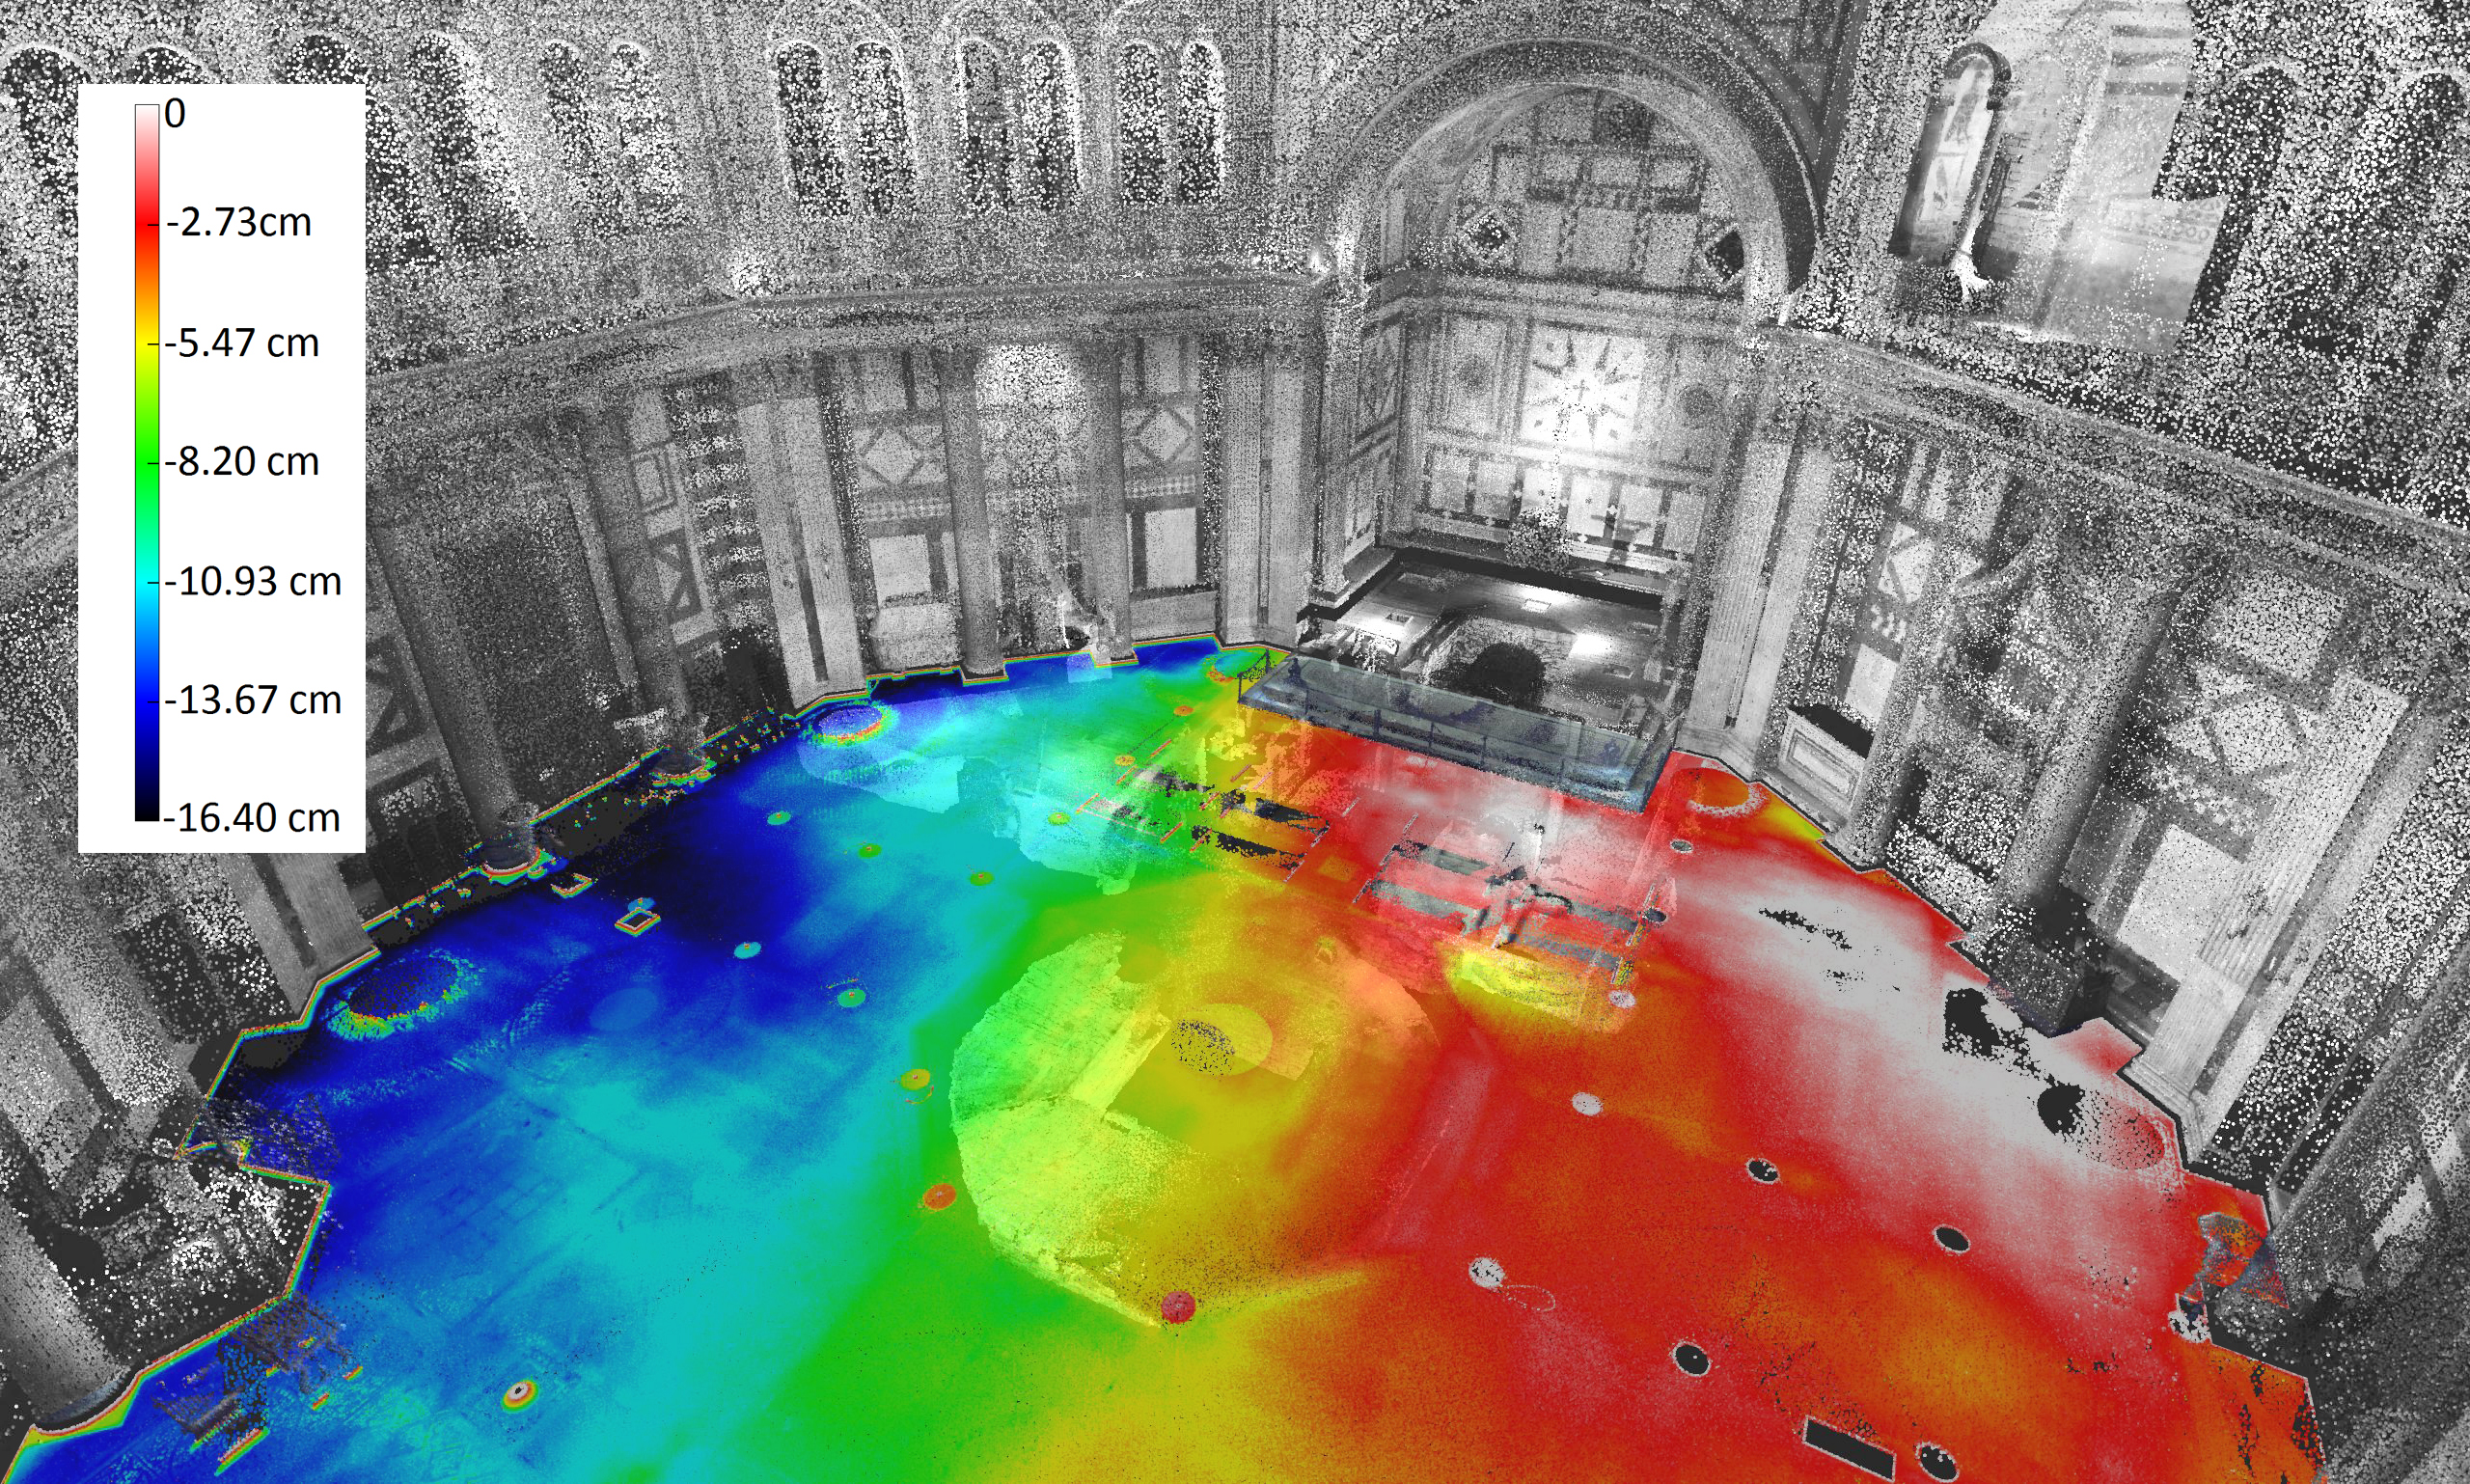 Thermal imaging show the floor of the Baptistery is not level